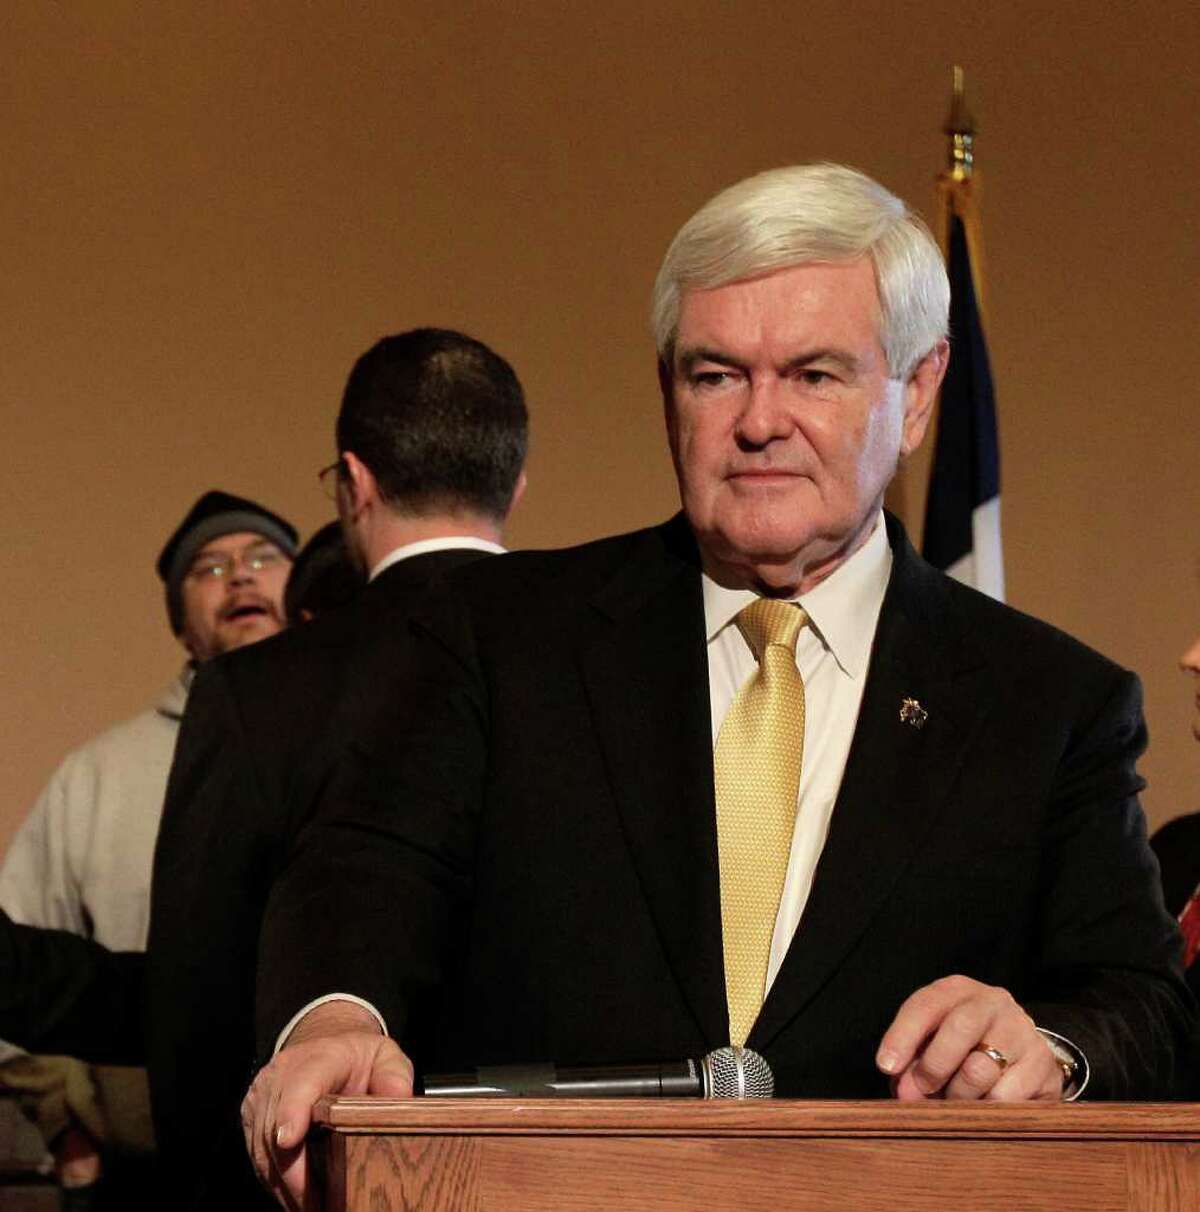 Republican presidential candidate, former House Speaker Newt Gingrich, pauses as an unidentified protester is confronted by security during a news conference at the Iowa State Capitol in Des Moines, Iowa, Wednesday, Dec. 21, 2011. (AP Photo/Charlie Riedel)